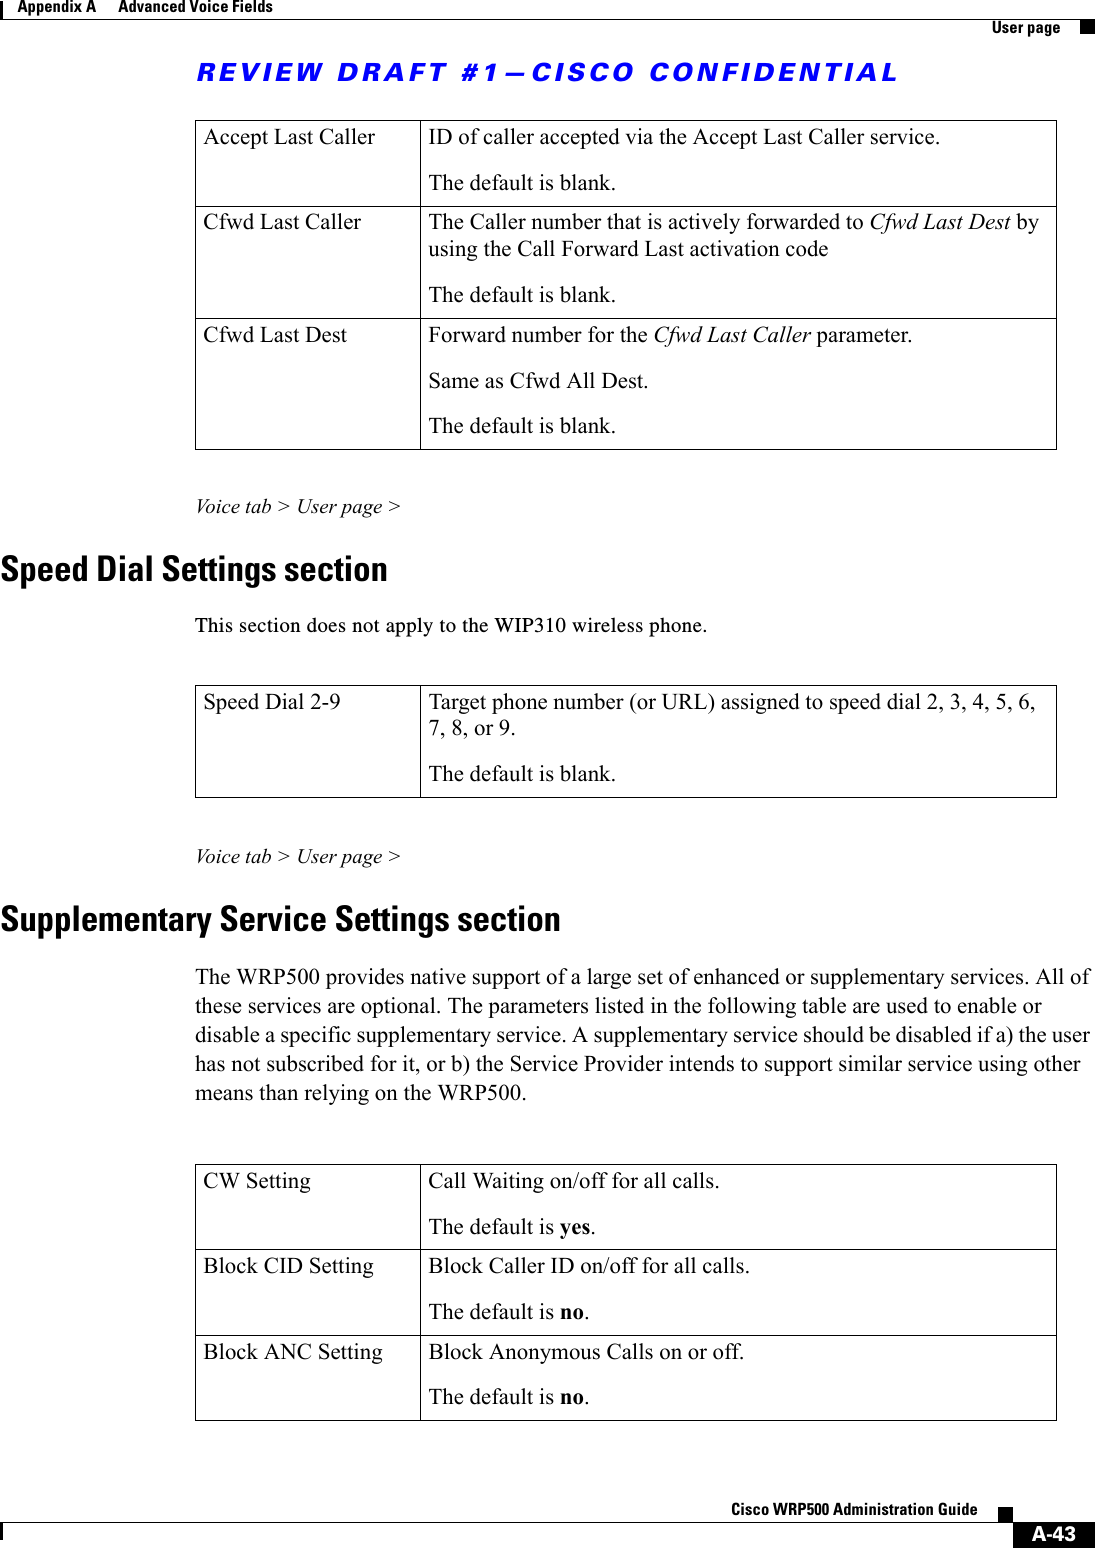 REVIEW DRAFT #1—CISCO CONFIDENTIALA-43Cisco WRP500 Administration Guide Appendix A      Advanced Voice Fields  User pageVoice tab &gt; User page &gt; Speed Dial Settings sectionThis section does not apply to the WIP310 wireless phone.Voice tab &gt; User page &gt; Supplementary Service Settings sectionThe WRP500 provides native support of a large set of enhanced or supplementary services. All of these services are optional. The parameters listed in the following table are used to enable or disable a specific supplementary service. A supplementary service should be disabled if a) the user has not subscribed for it, or b) the Service Provider intends to support similar service using other means than relying on the WRP500.Accept Last Caller ID of caller accepted via the Accept Last Caller service.The default is blank. Cfwd Last Caller The Caller number that is actively forwarded to Cfwd Last Dest by using the Call Forward Last activation codeThe default is blank. Cfwd Last Dest Forward number for the Cfwd Last Caller parameter.Same as Cfwd All Dest. The default is blank. Speed Dial 2-9 Target phone number (or URL) assigned to speed dial 2, 3, 4, 5, 6, 7, 8, or 9.The default is blank. CW Setting Call Waiting on/off for all calls.The default is yes. Block CID Setting Block Caller ID on/off for all calls.The default is no. Block ANC Setting Block Anonymous Calls on or off.The default is no. 